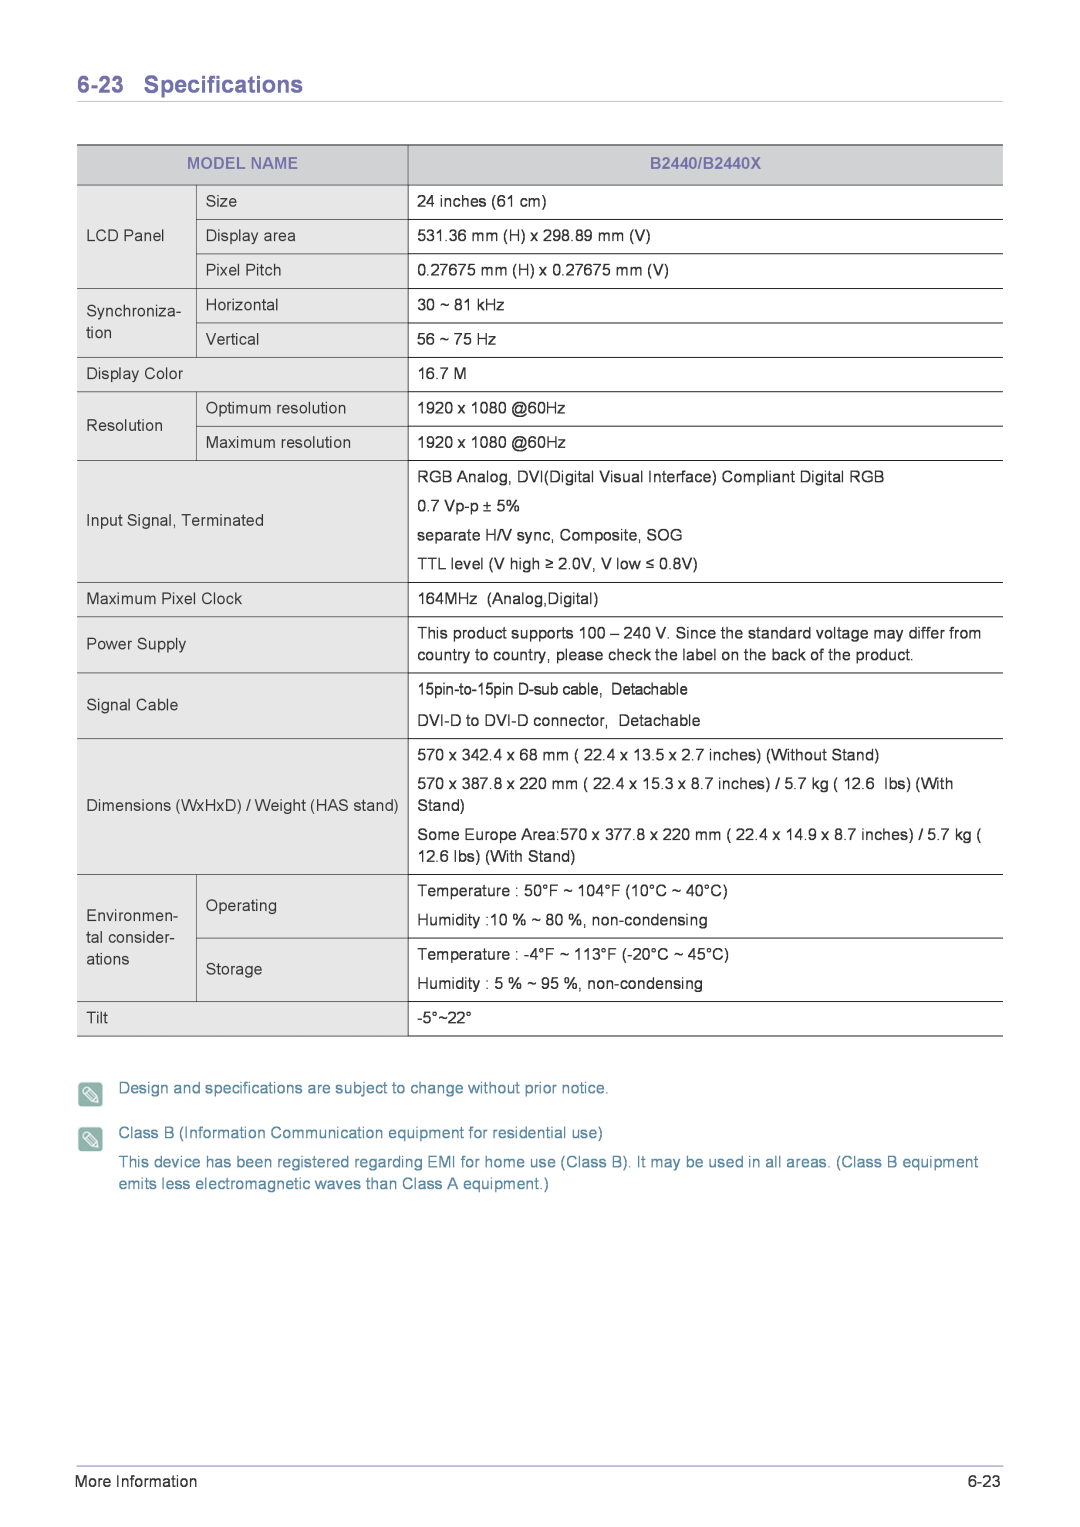 Samsung B2240MWX Specifications, Model Name, B2440/B2440X, Class B Information Communication equipment for residential use 